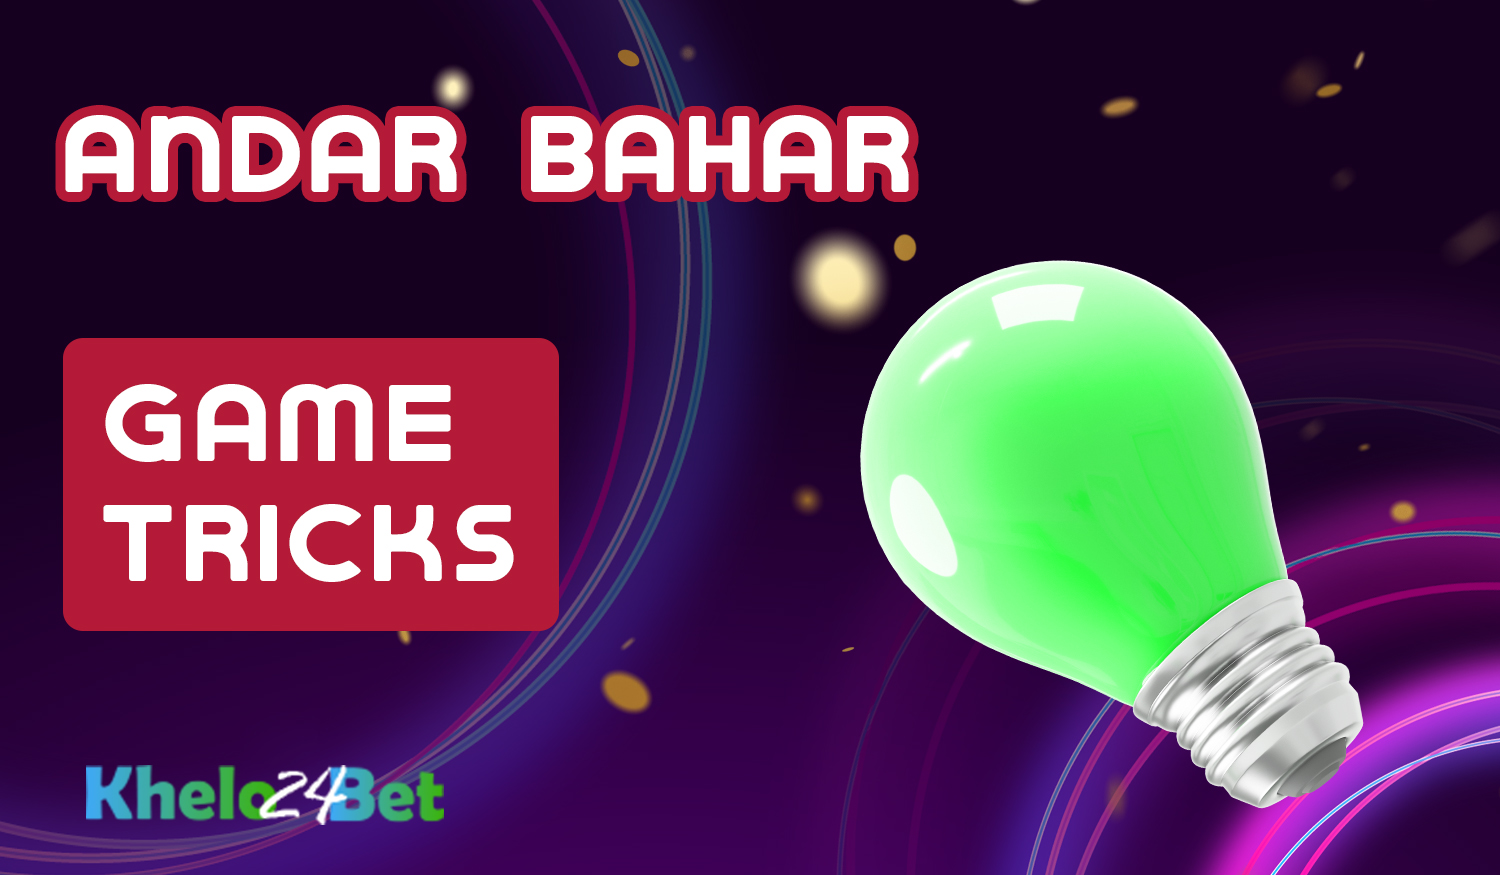 Some useful tips on how to successfully play Andar Bahar at Khelo24bet